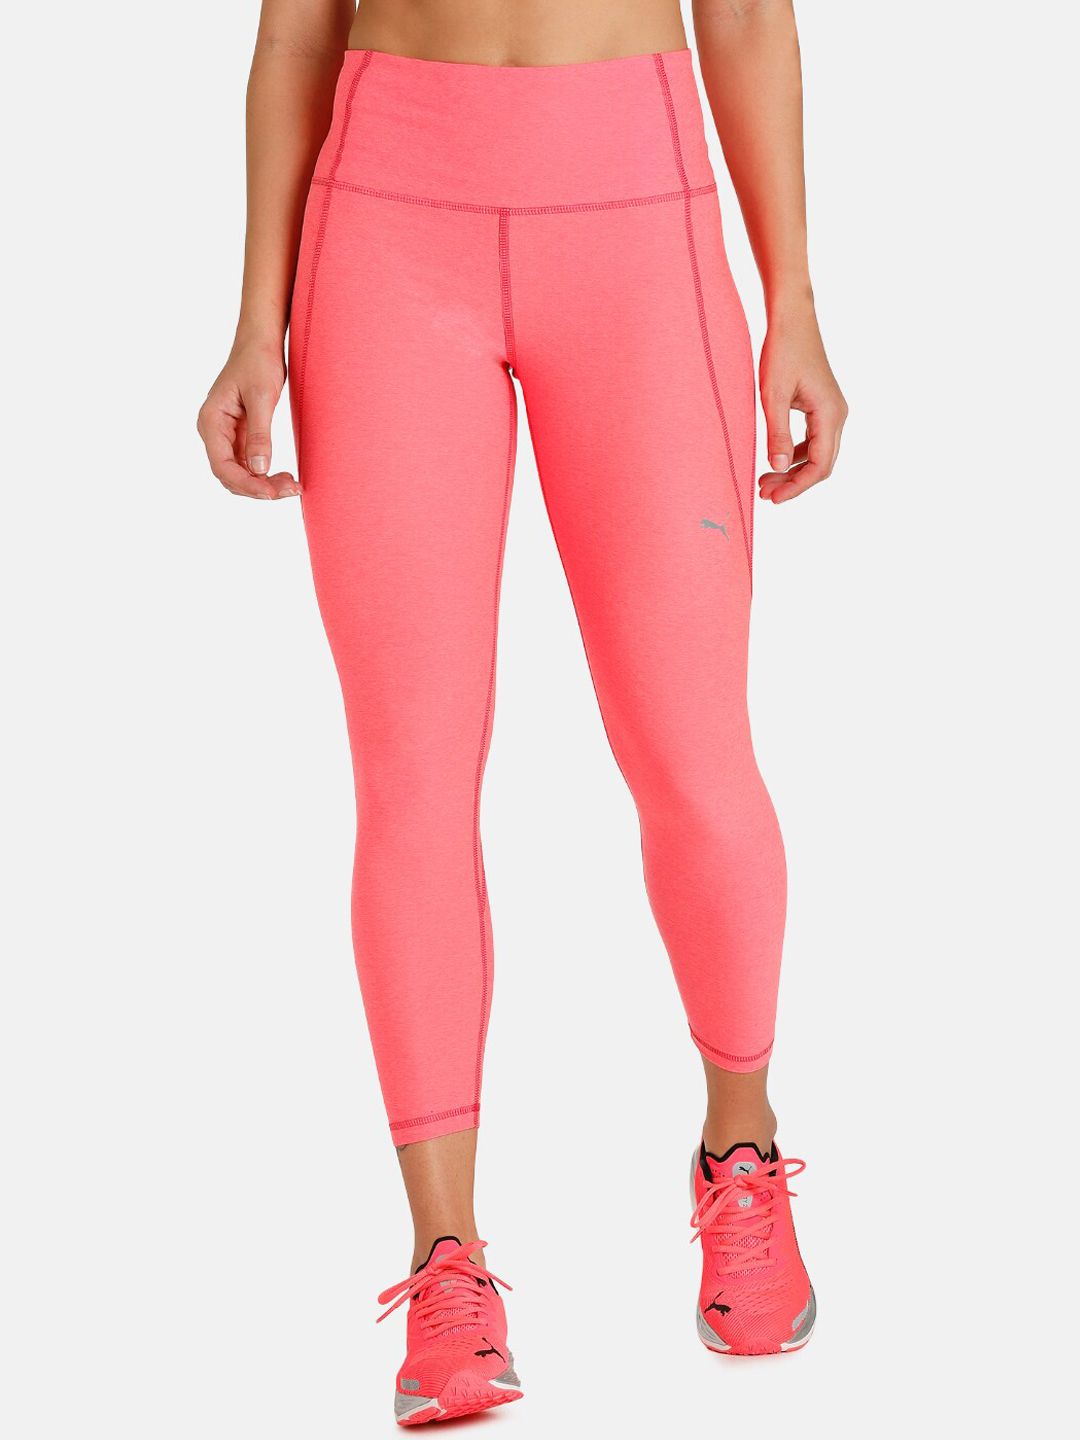 Puma Women Pink Solid Tights Price in India